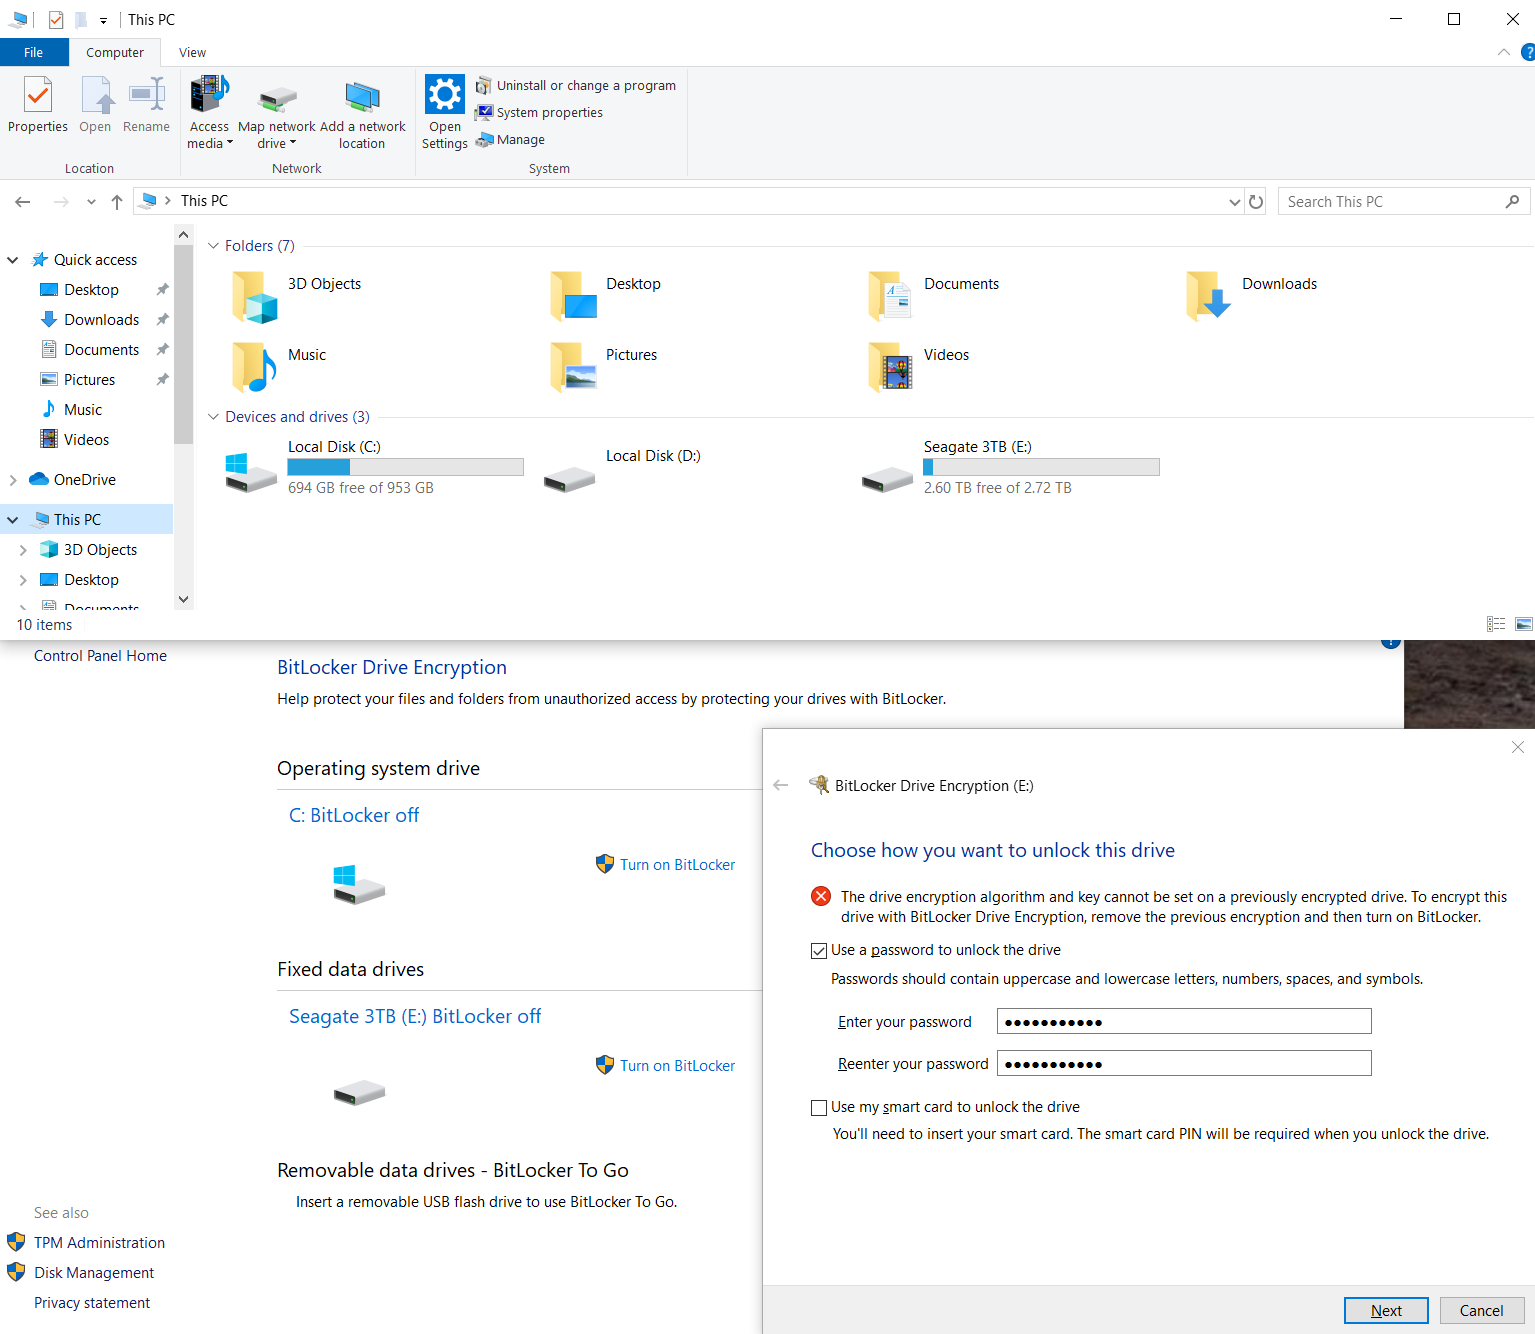 Unable to remove previous encryption in BitLocker 0c3a63e6-cc06-4fbc-b189-0d16cd6138a1?upload=true.png